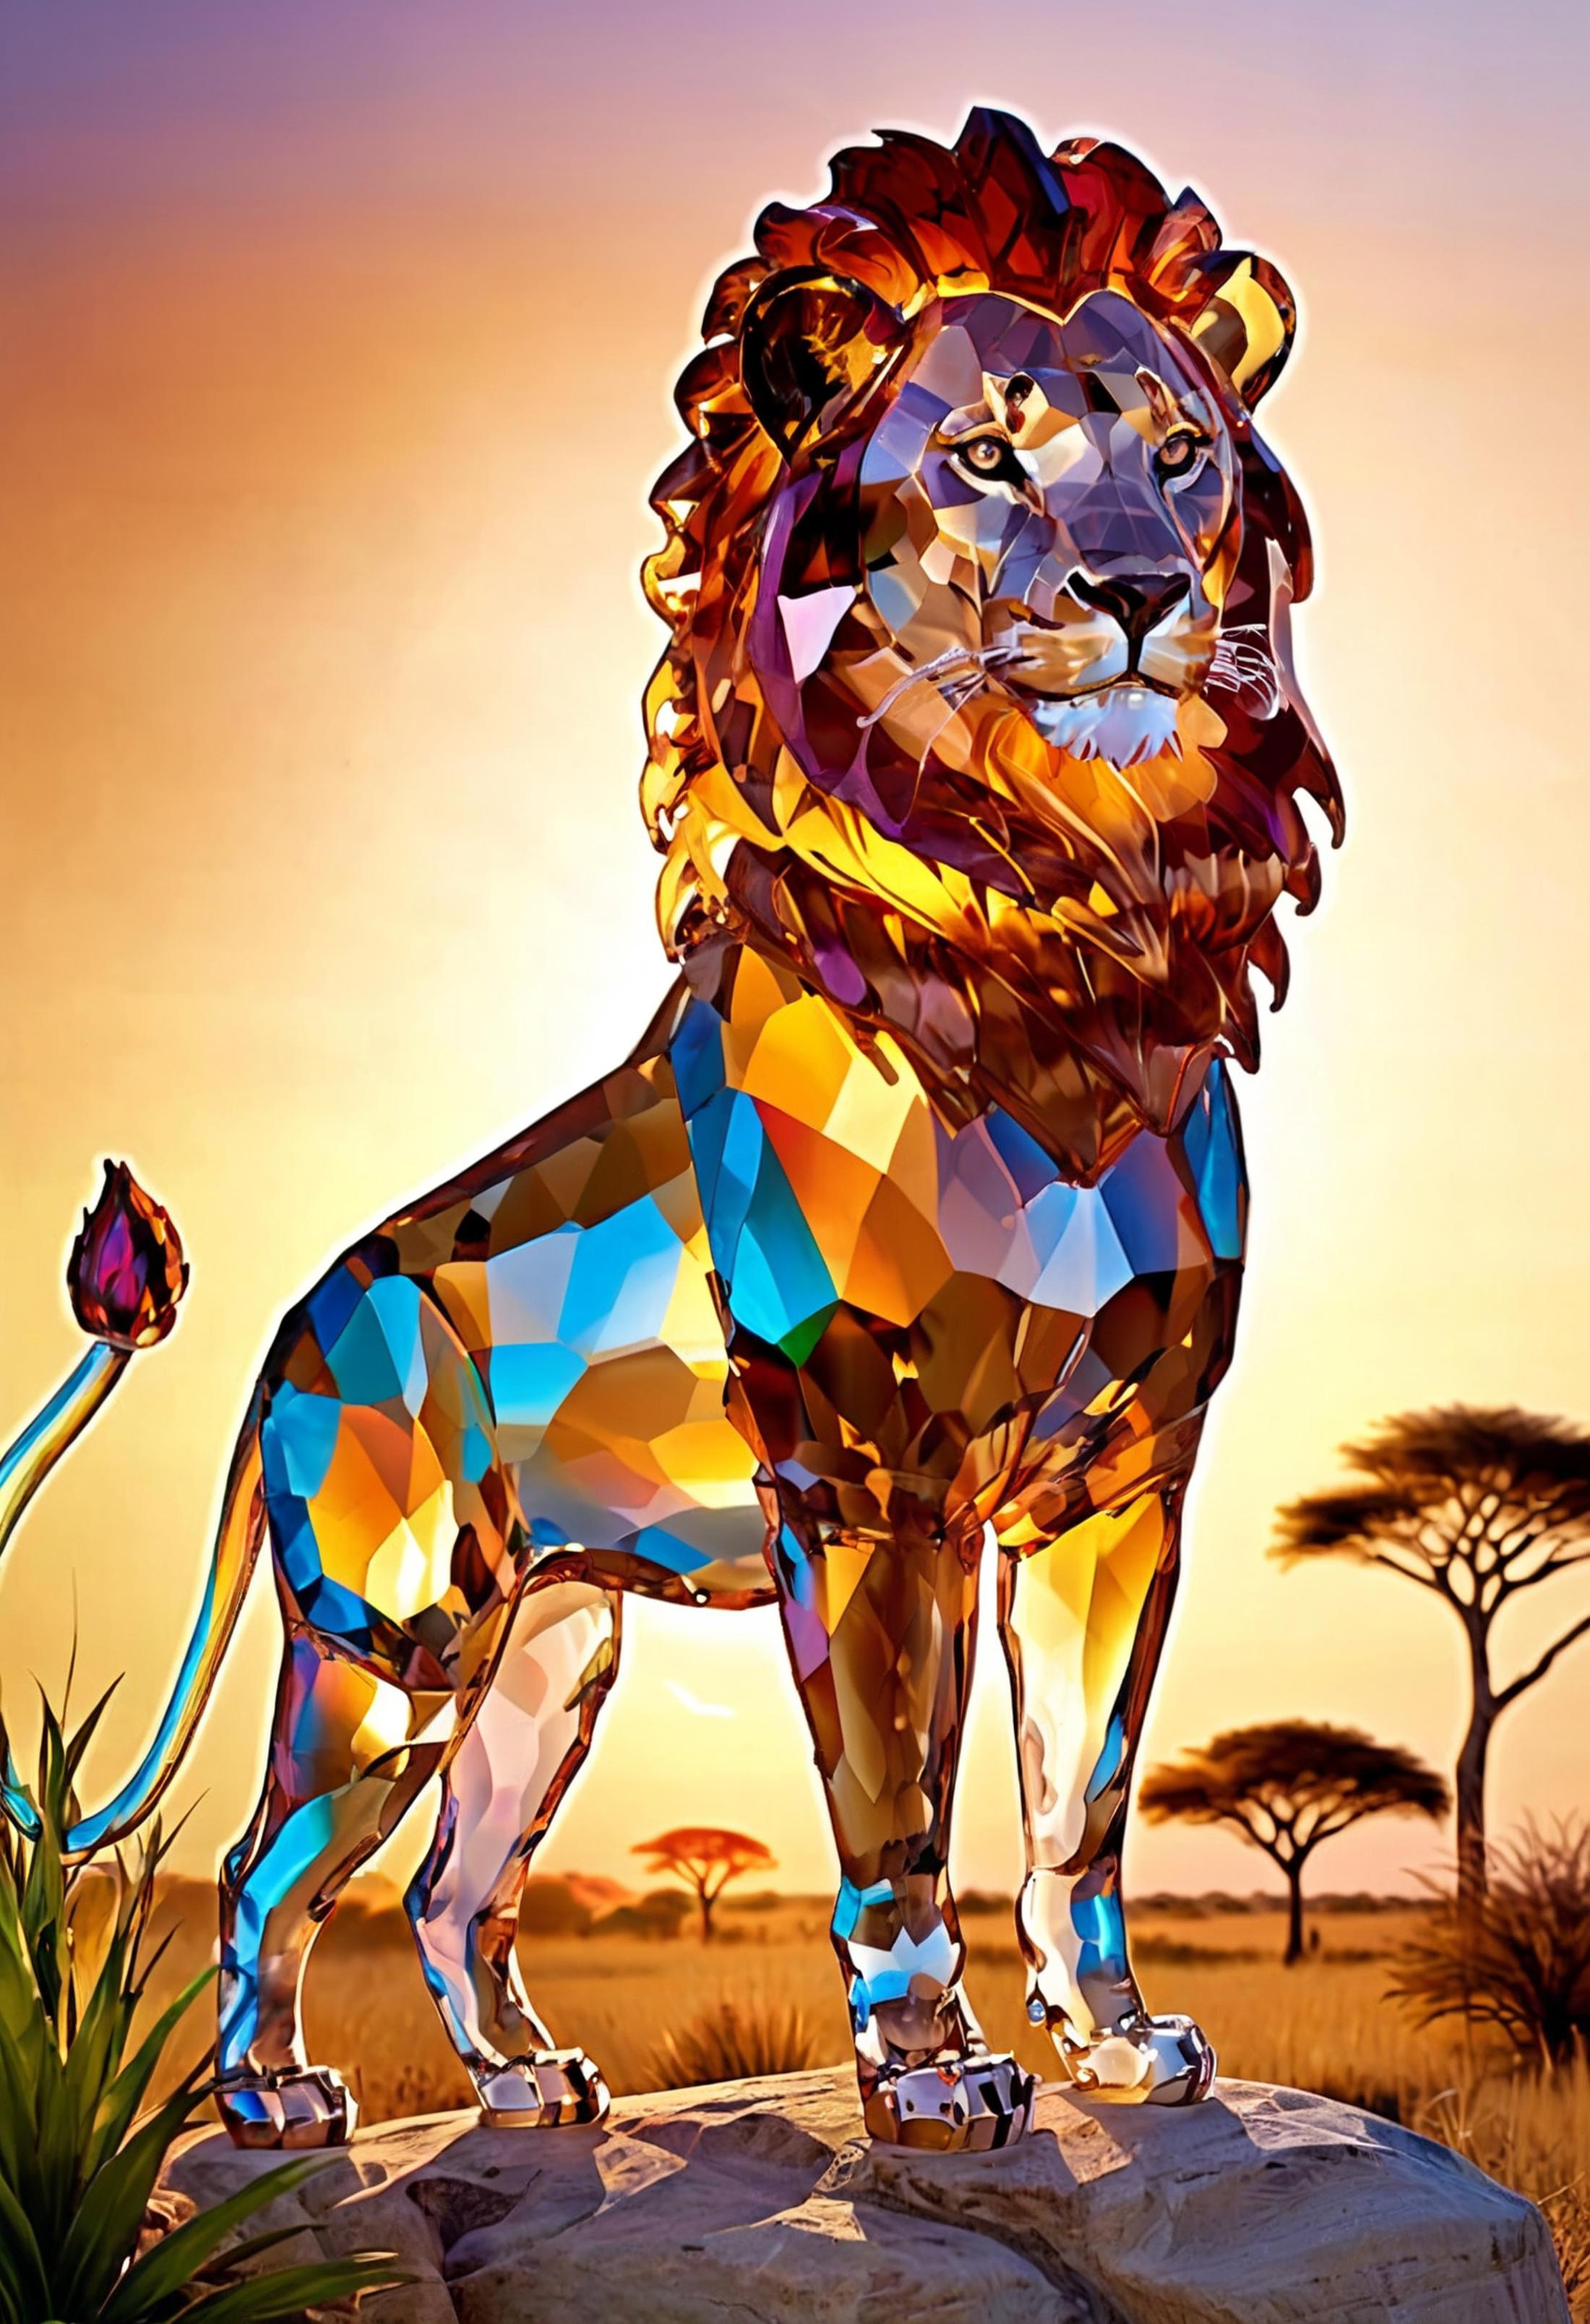 A Lion with a Sunset Background: A Beautiful Artistic Illustration